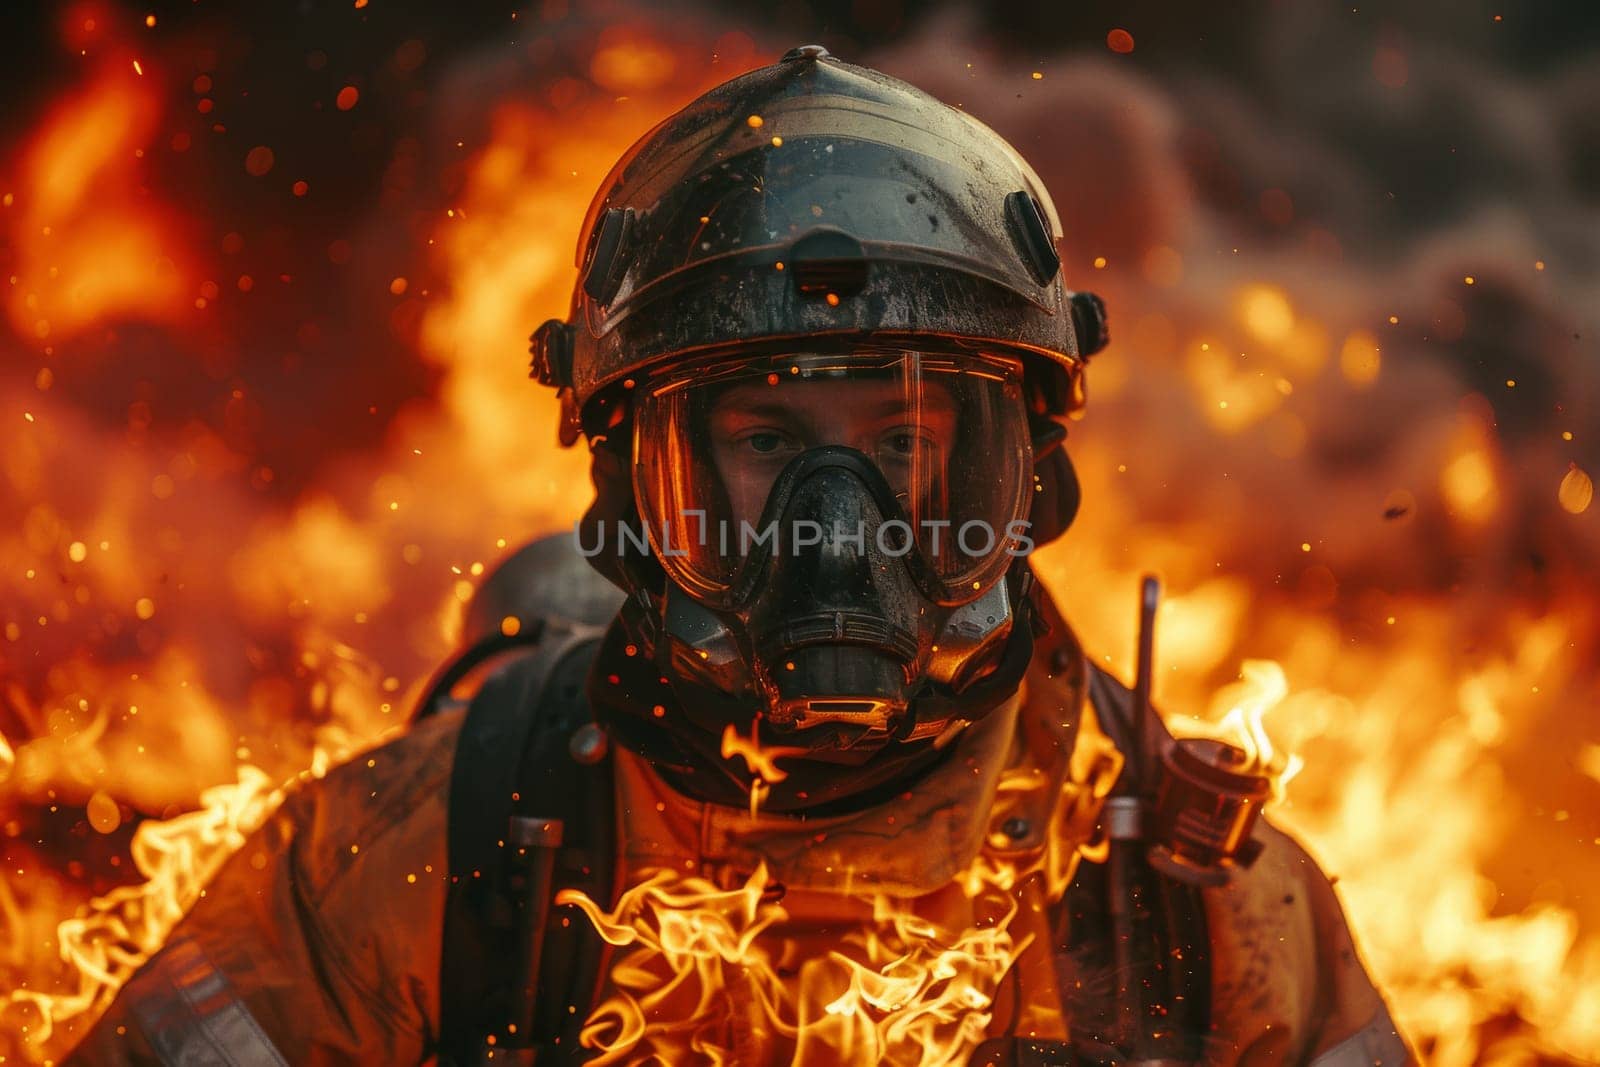 A firefighter is standing in front of a fire, wearing a full protective suit and a helmet. The scene is intense and dramatic, with the fire raging and the firefighter bravely facing it